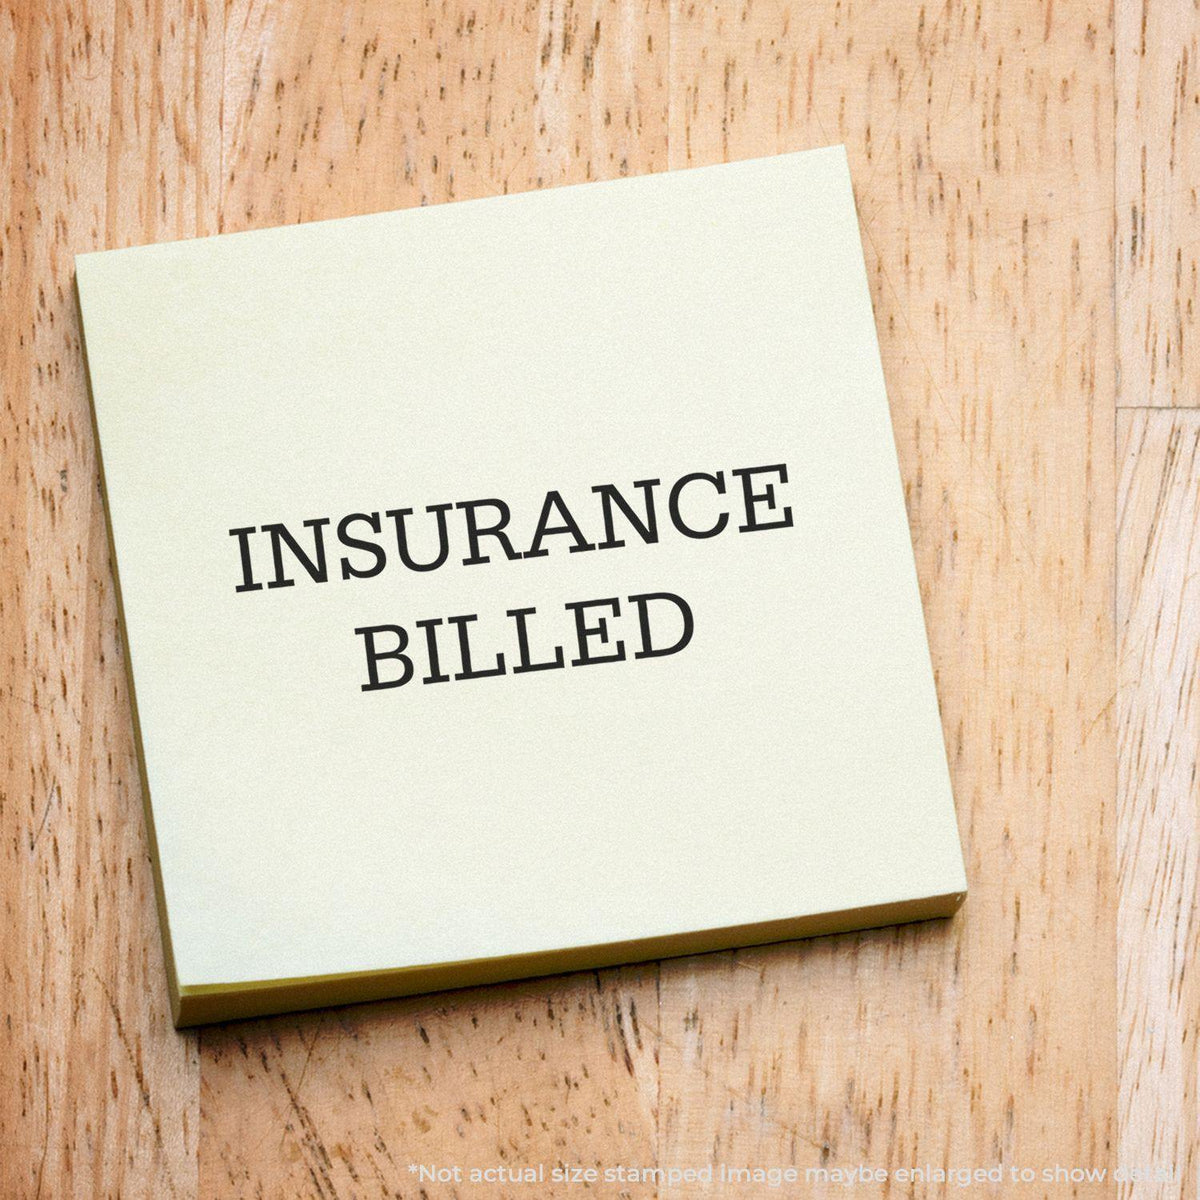 Insurance Billed Rubber Stamp In Use Photo